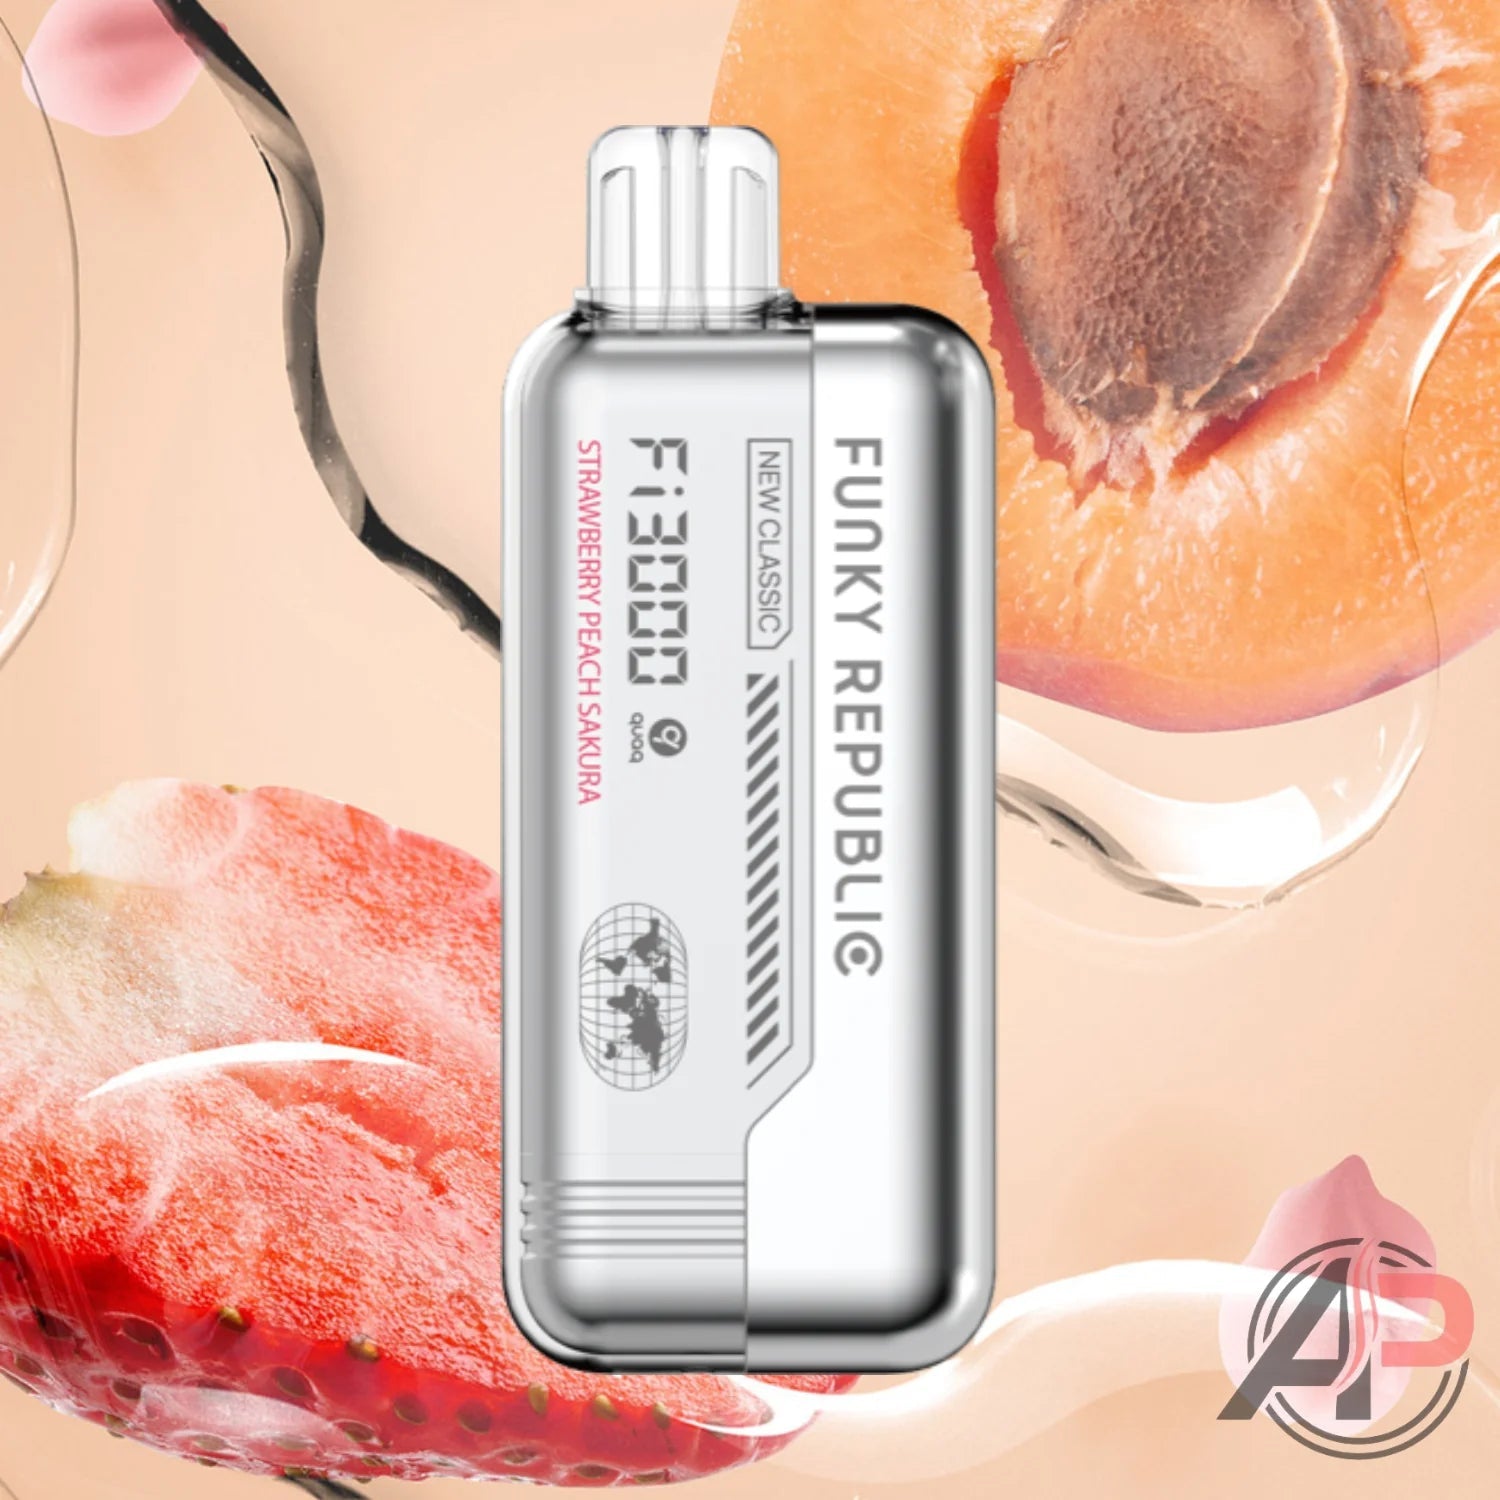 What Flavor is Peach Ice by Funky Republic?-News